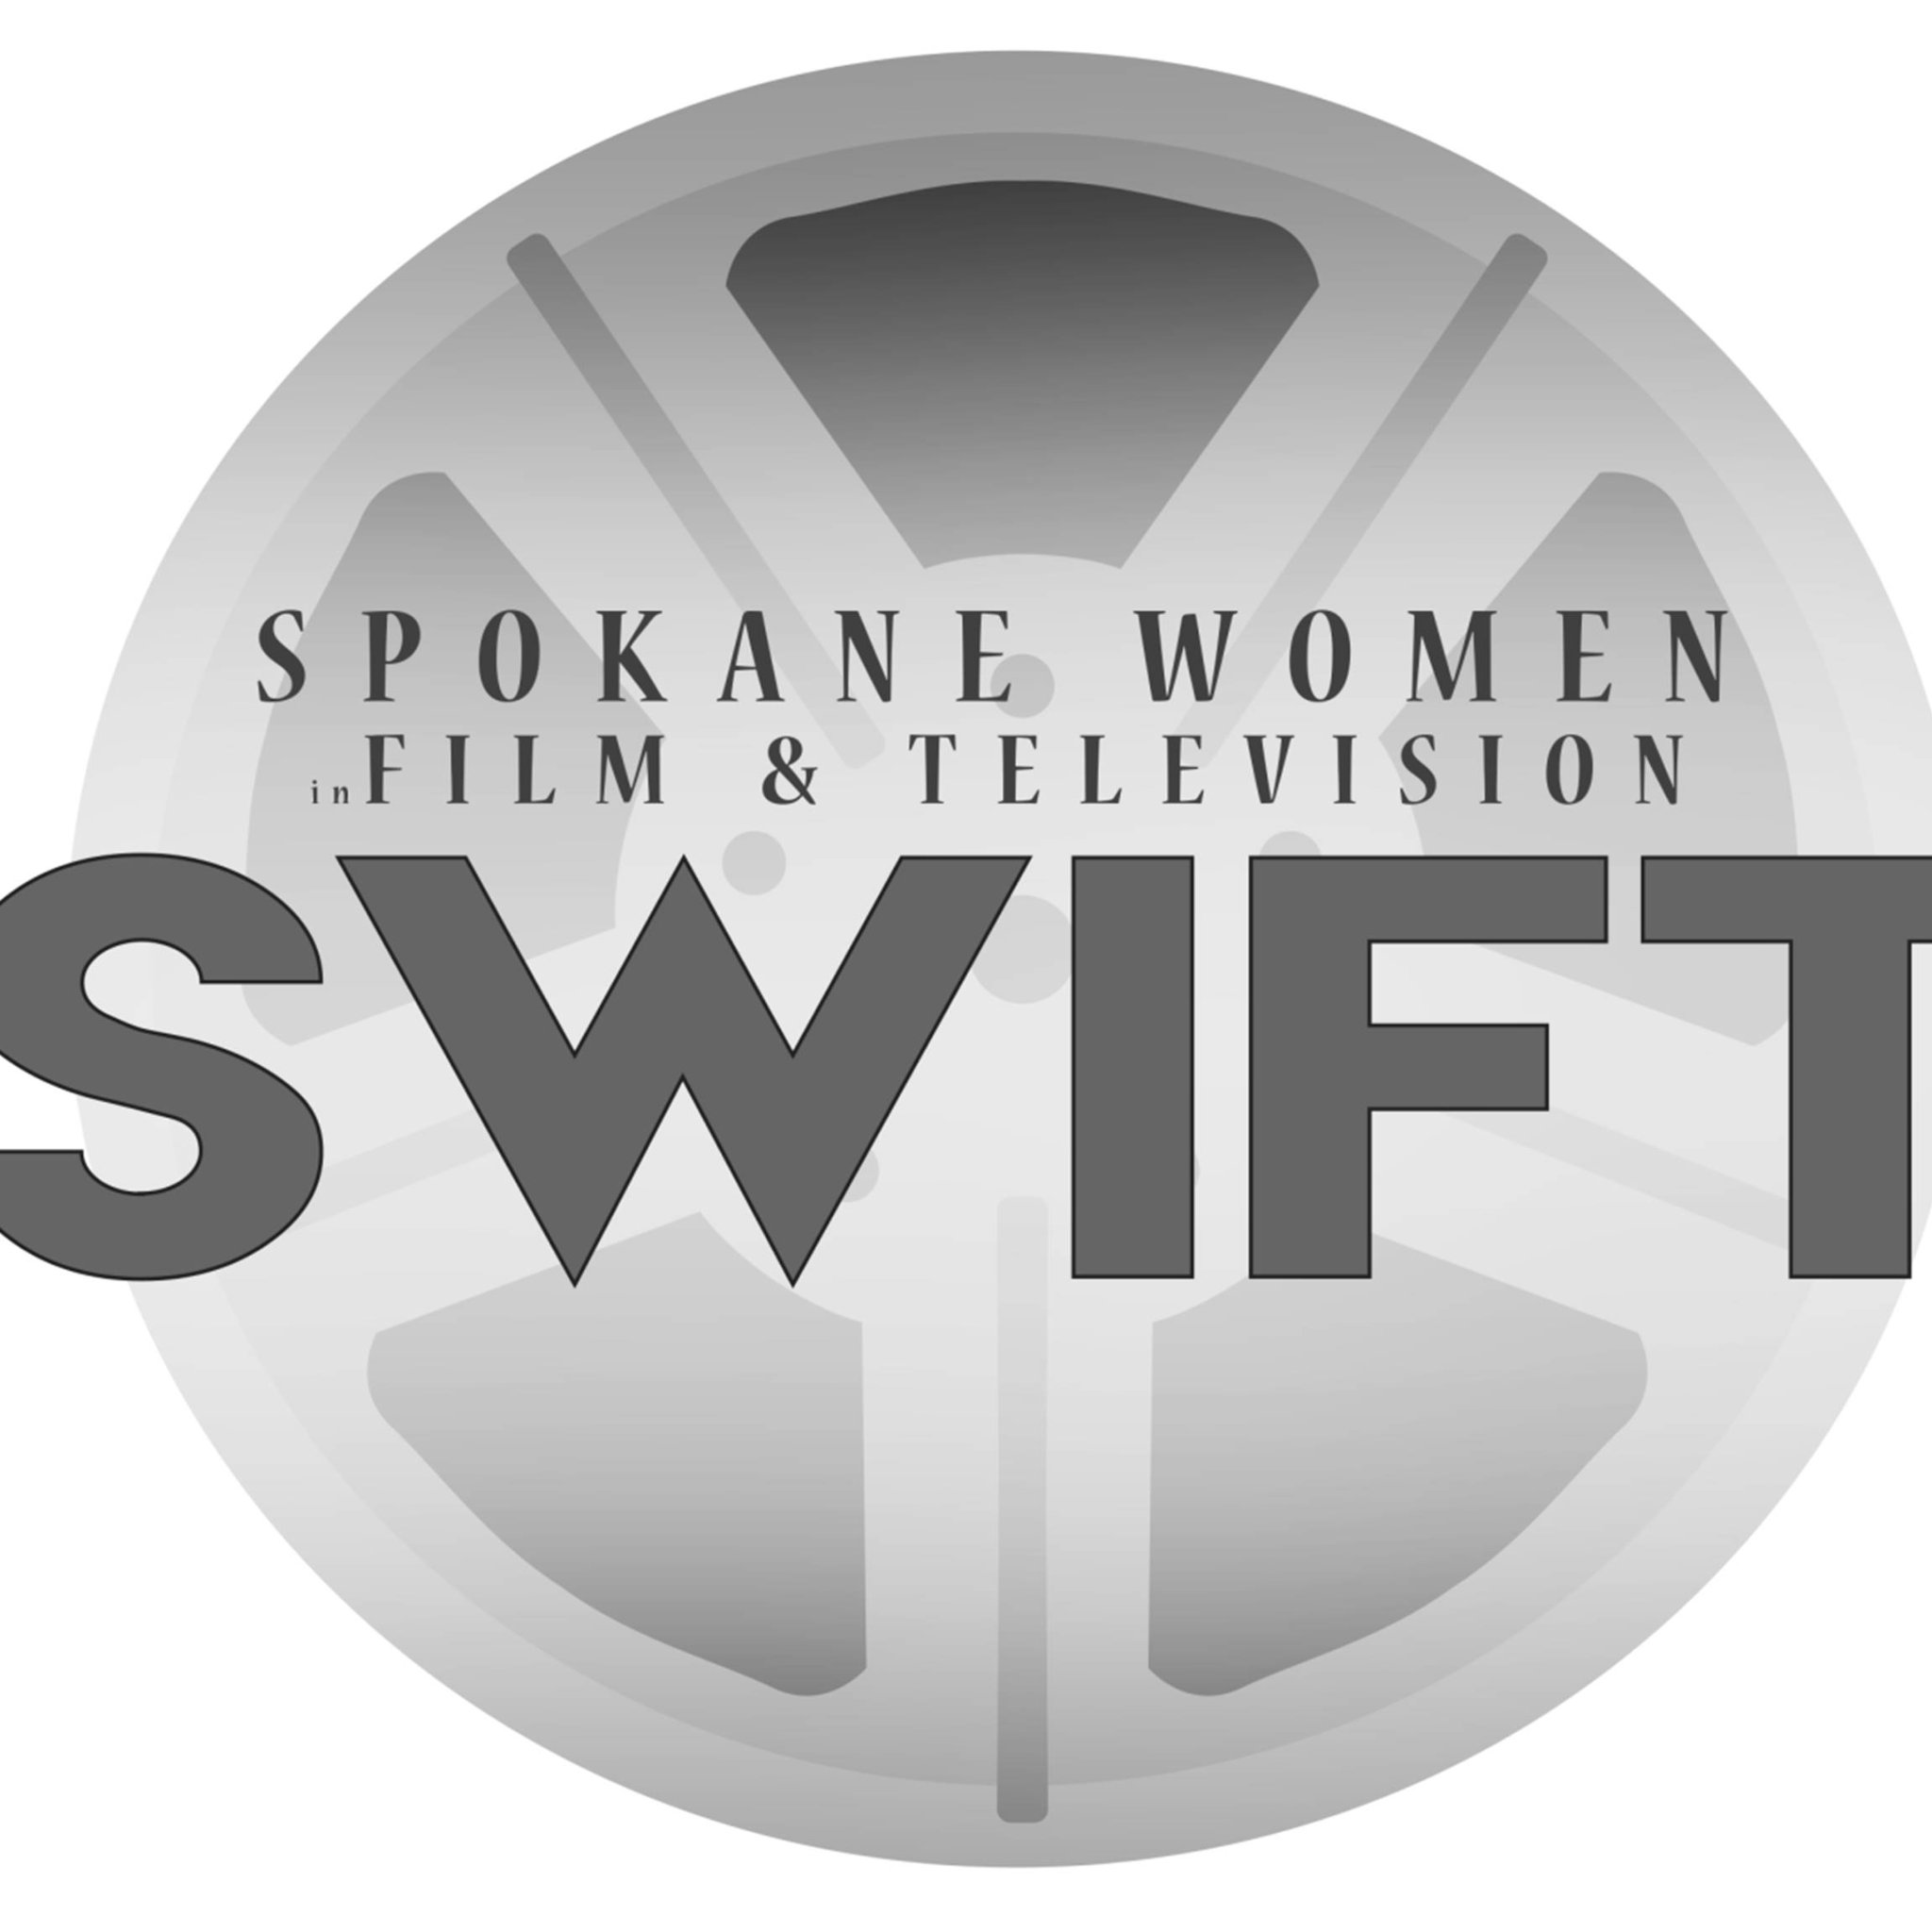 Spokane Women in Film & Television is currently working on the SWIFT Mentoring Project - a film project with entirely women behind and in front of the camera.